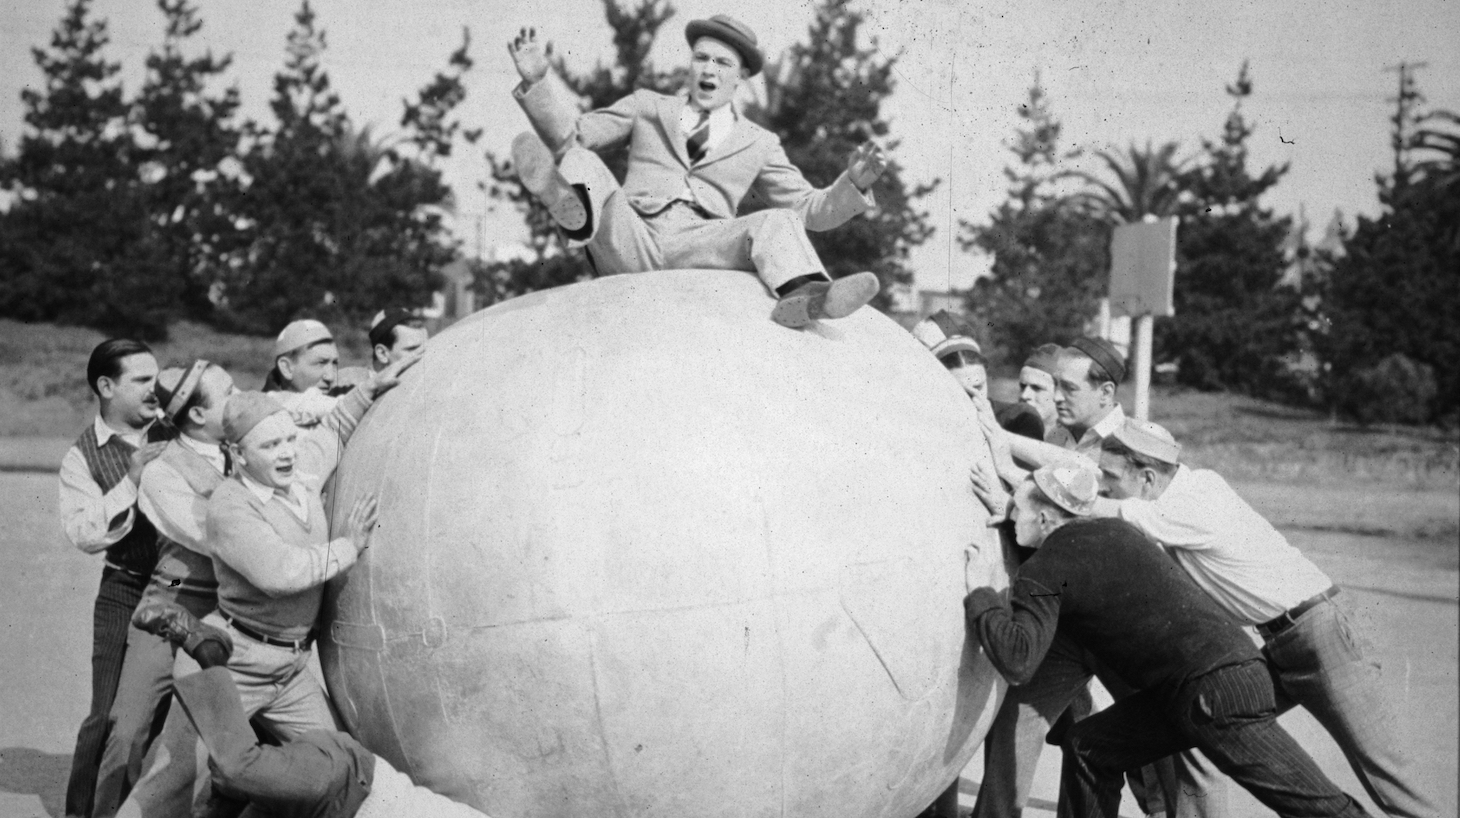 Two groups of men push on opposite sides of a large ball, on top of which sits a man who is losing his balance in a still from the silent film, 'Going Great'. (Photo by Hulton Archive/Getty Images)